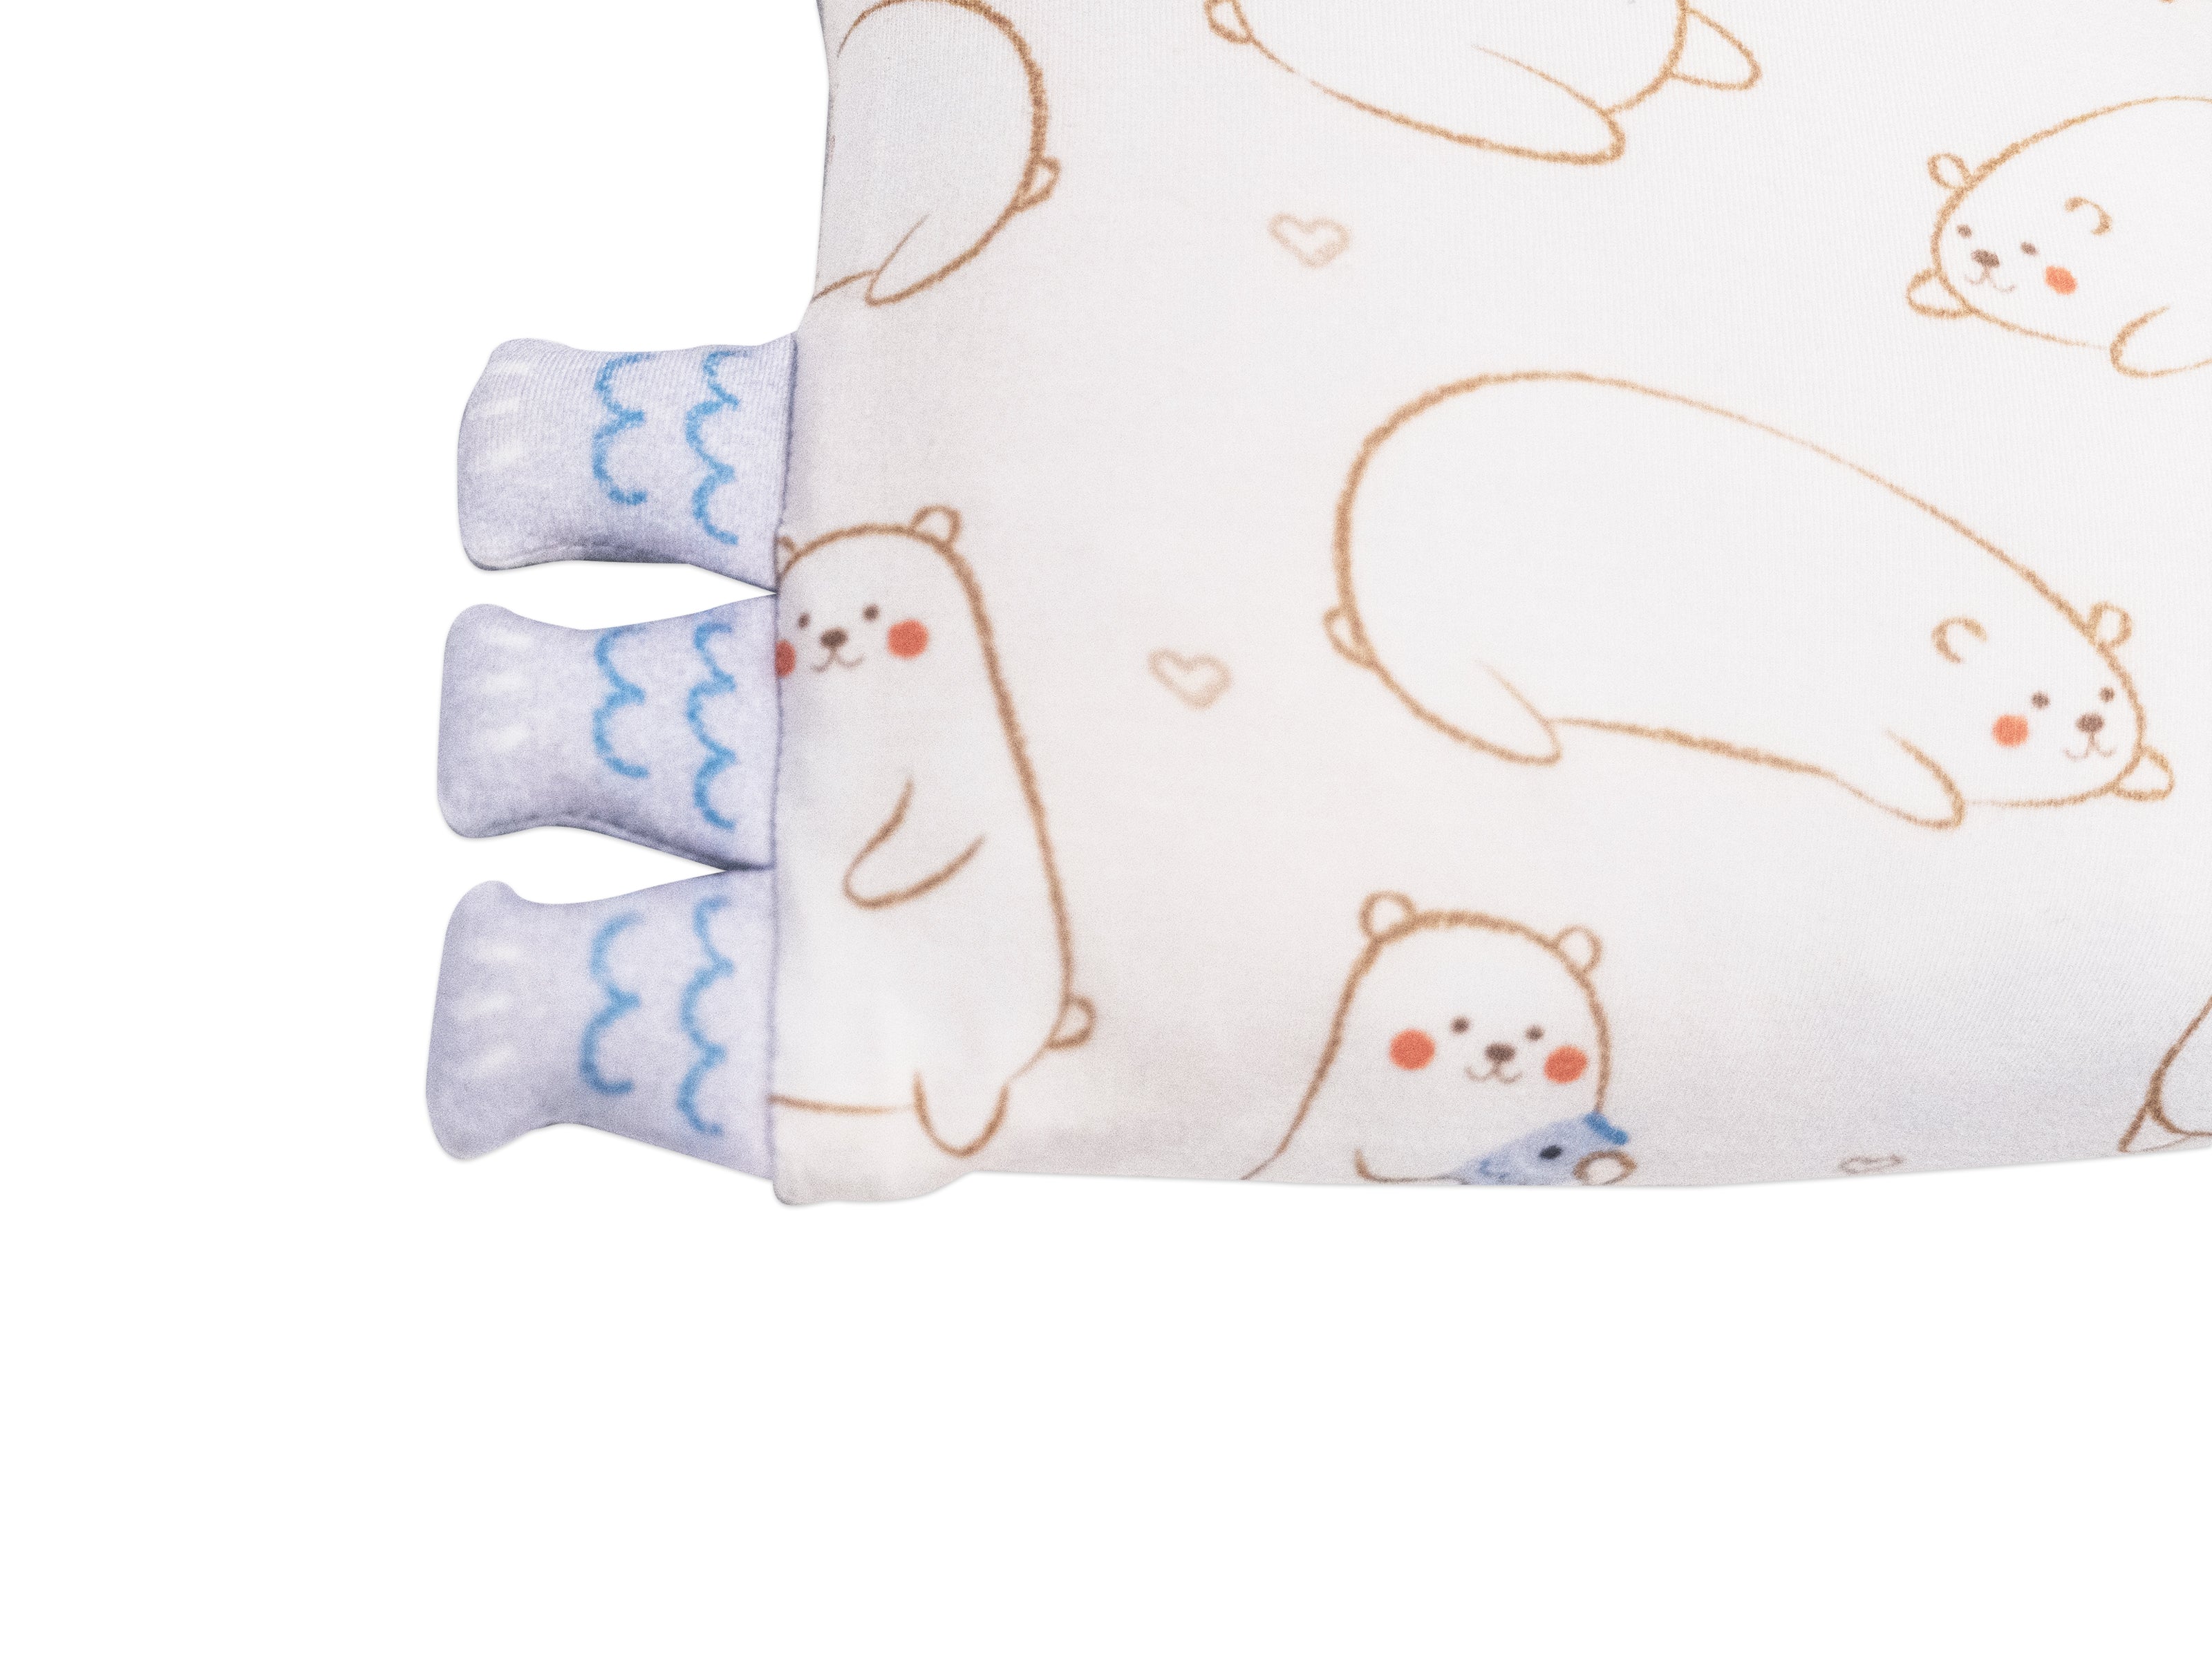 cho pillow fish buntings designed for teething babies